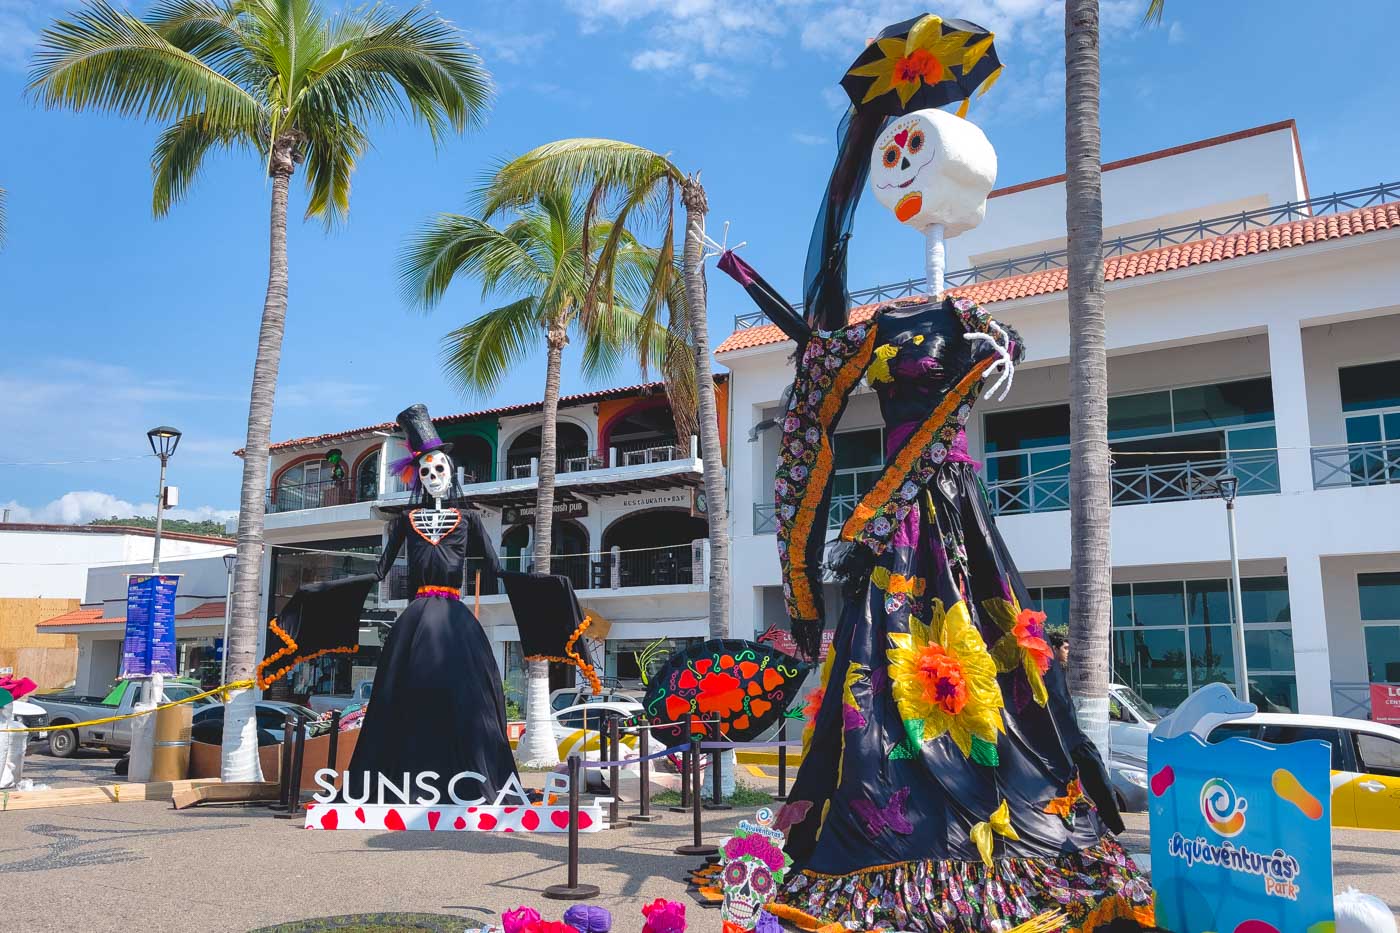 Day of the Dead themed sculptures underneath palm trees along Puerto Vallarta Malecon.